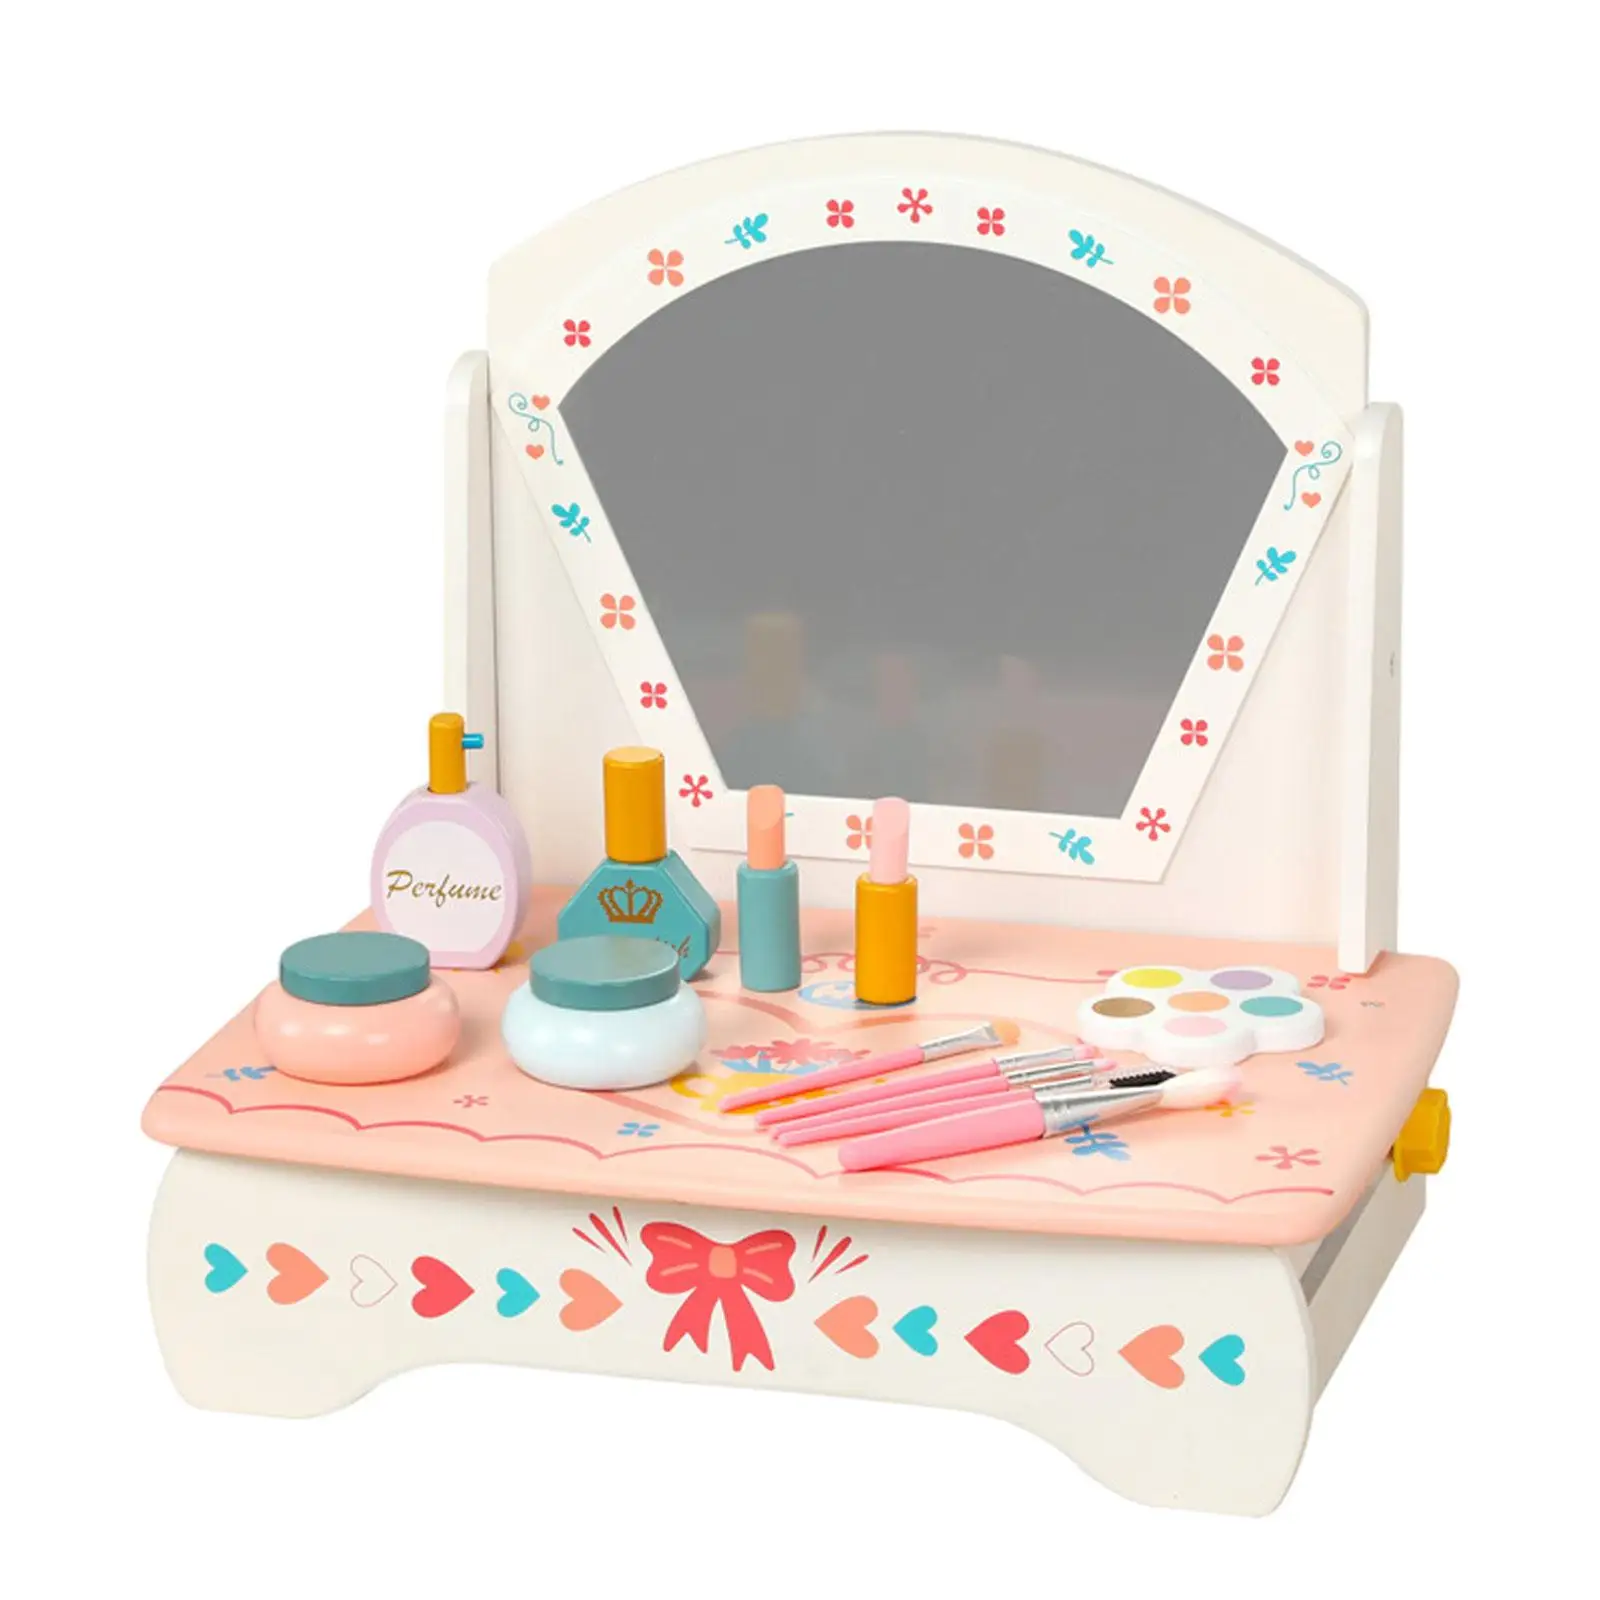 Wooden Vanity Table Toy with Accessories Wooden Princess Vanity Table Girls Playset Makeup Kits for Age 3 4 5 6 Children Kids